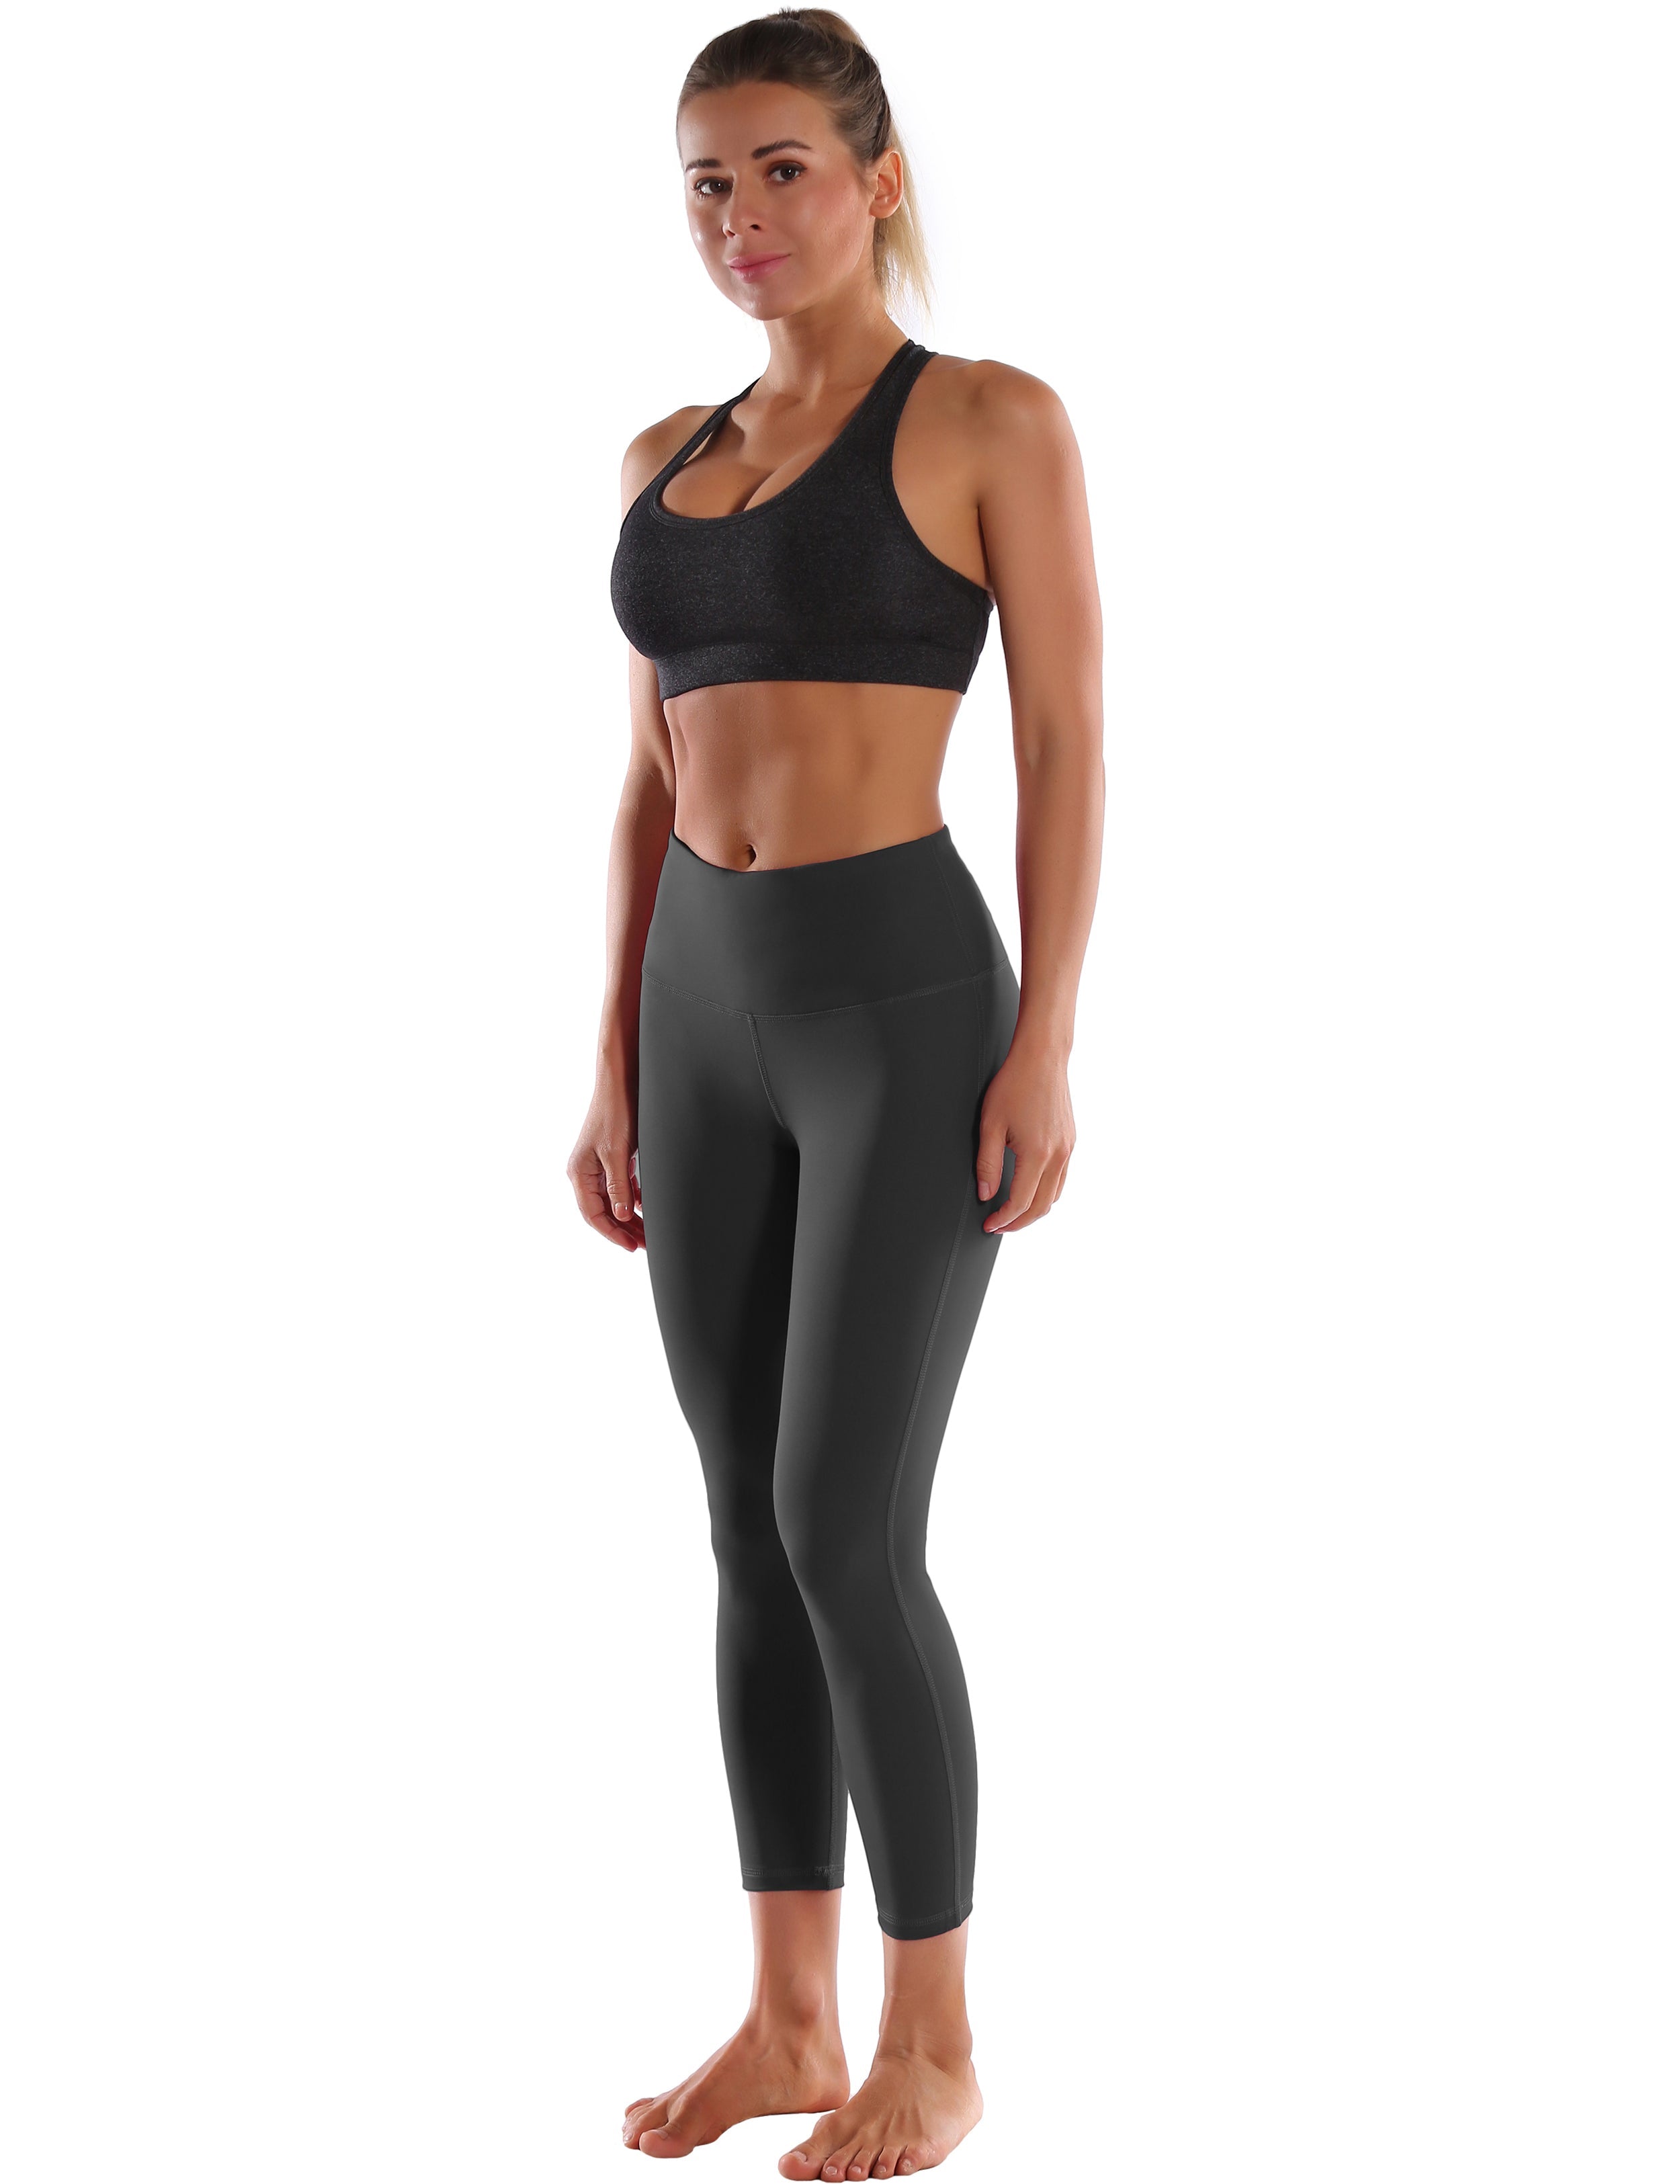 22" High Waist Side Line Capris shadowcharcoal 75%Nylon/25%Spandex Fabric doesn't attract lint easily 4-way stretch No see-through Moisture-wicking Tummy control Inner pocket